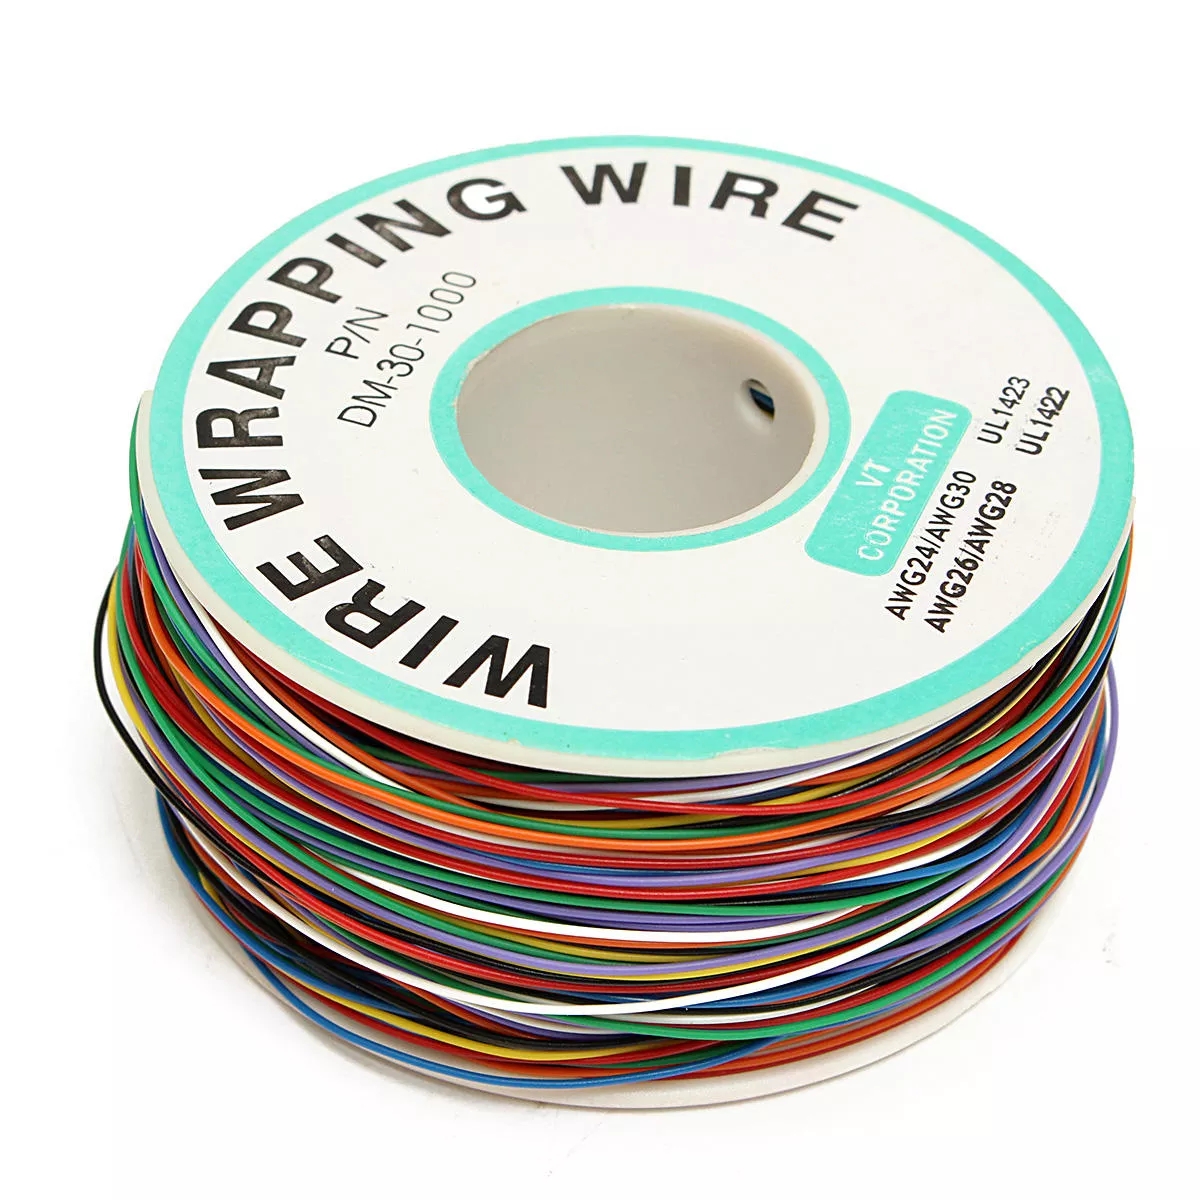 2Pcs-DANIU-250M-8-Wire-Colored-Insulated-PN-B-30-1000-30AWG-Wire-Wrapping-Cable-Wrap-Reel-1597179-3